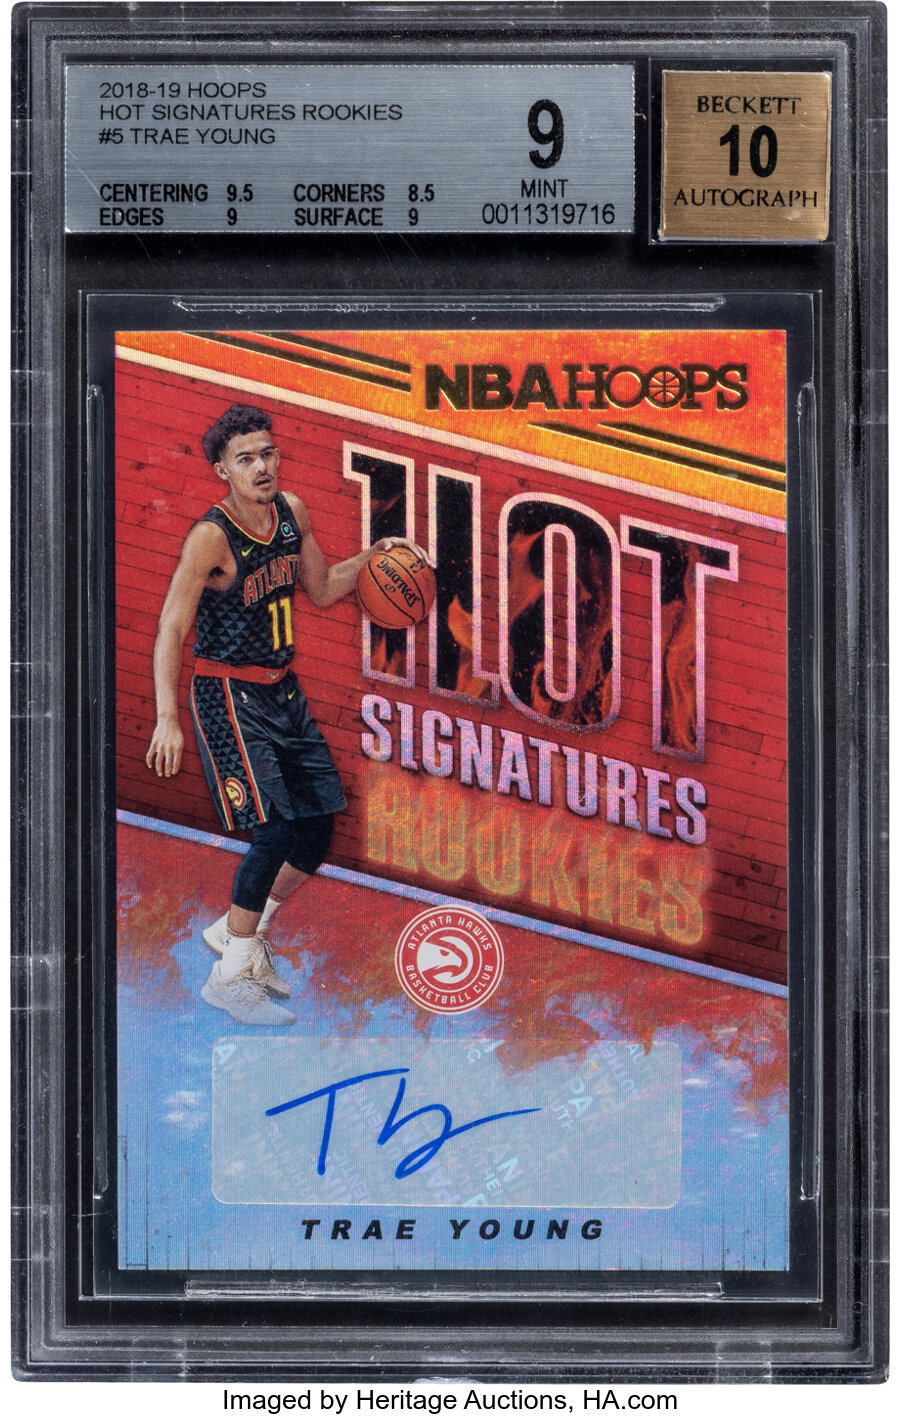 2018 Panini Hoops Trae Young (Hot Signatures Rookies) #HSR-TY BGS Mint 9, Auto 10